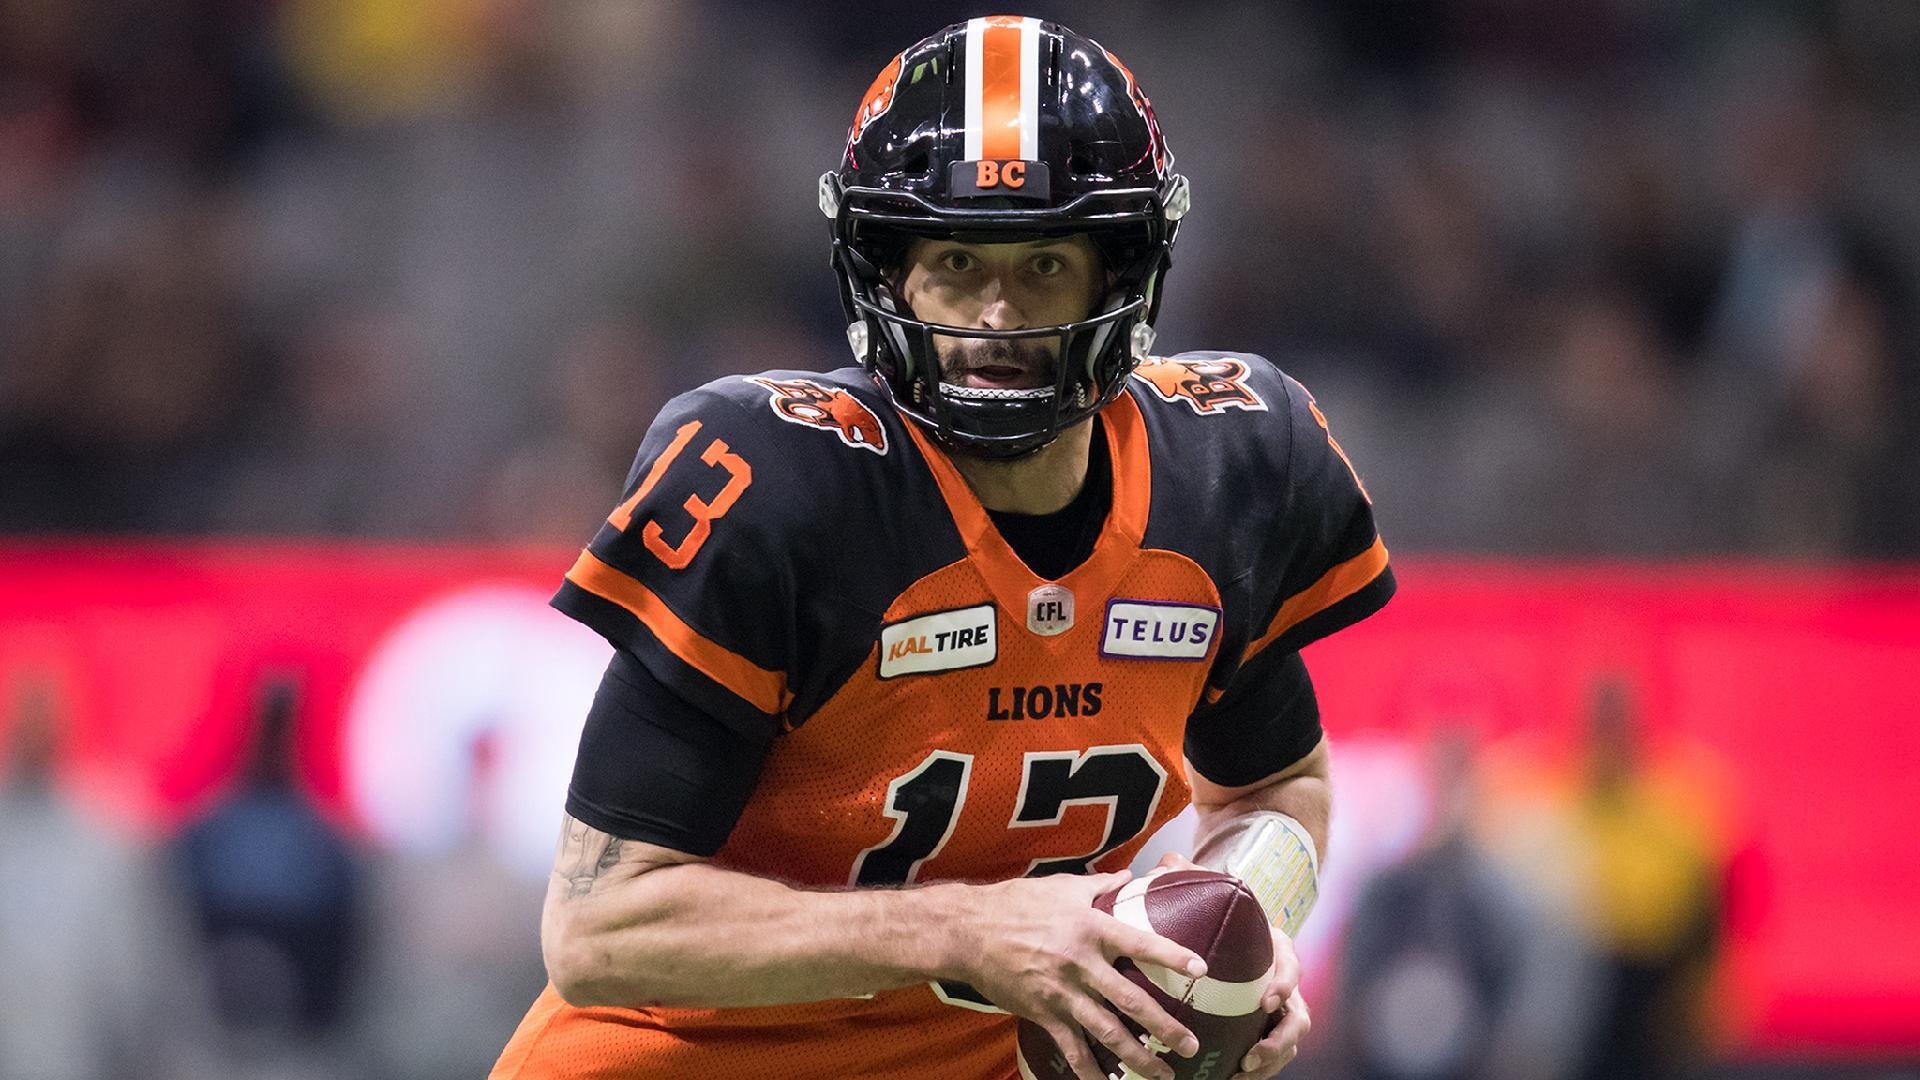 Canadian Football: Michael Reilly, An American former quarterback player, Grey Cup Most Valuable Player, Best TD performance. 1920x1080 Full HD Background.